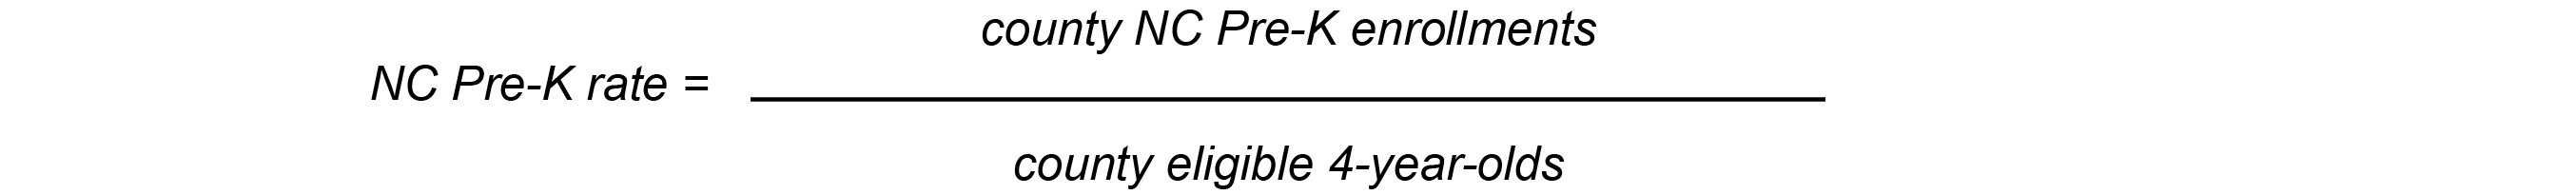 NC Pre-K rate = county NC Pre-K enrollments / county eligible 4-year-olds